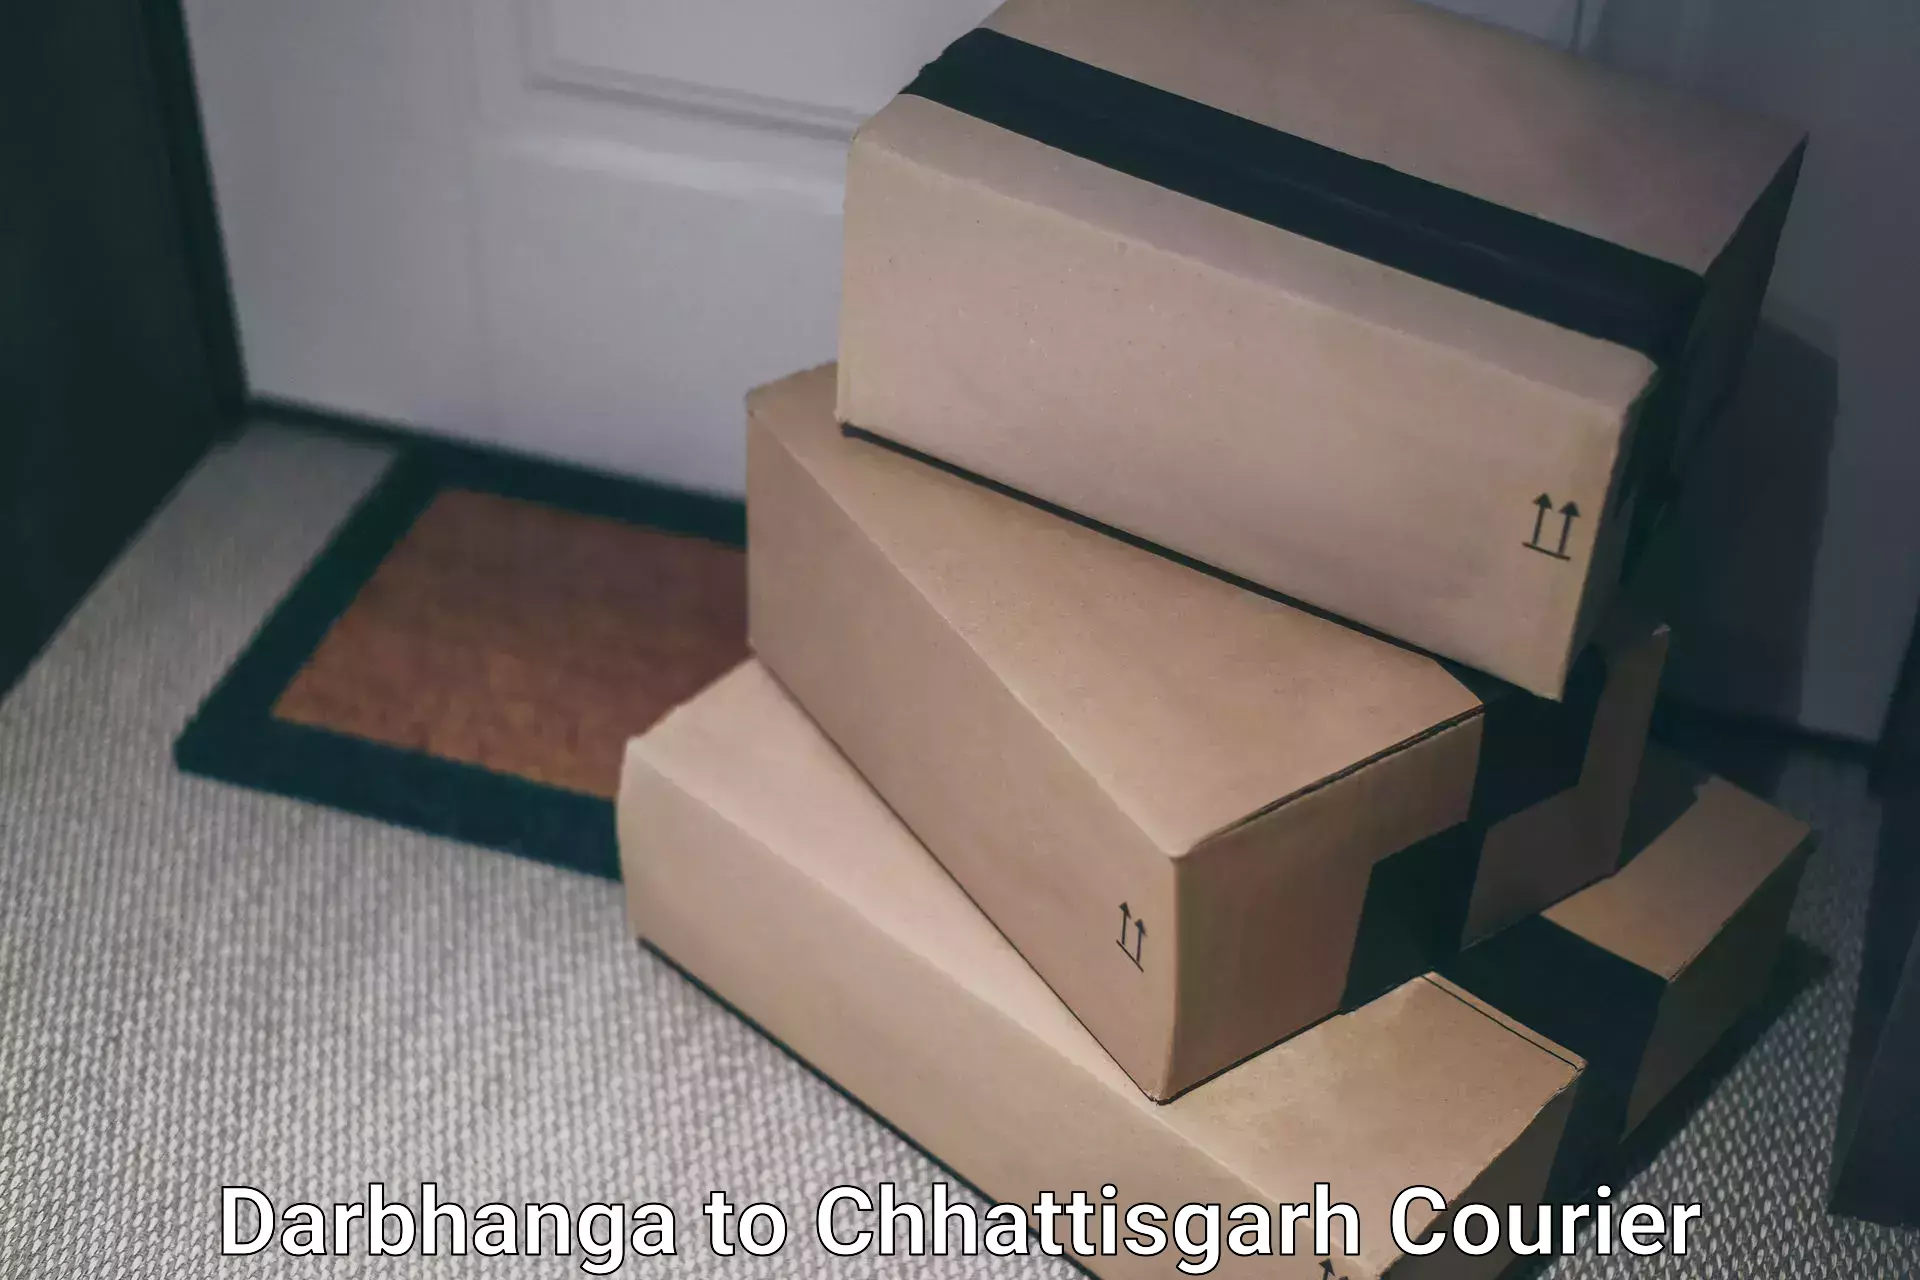 Courier services in Darbhanga to Chhattisgarh